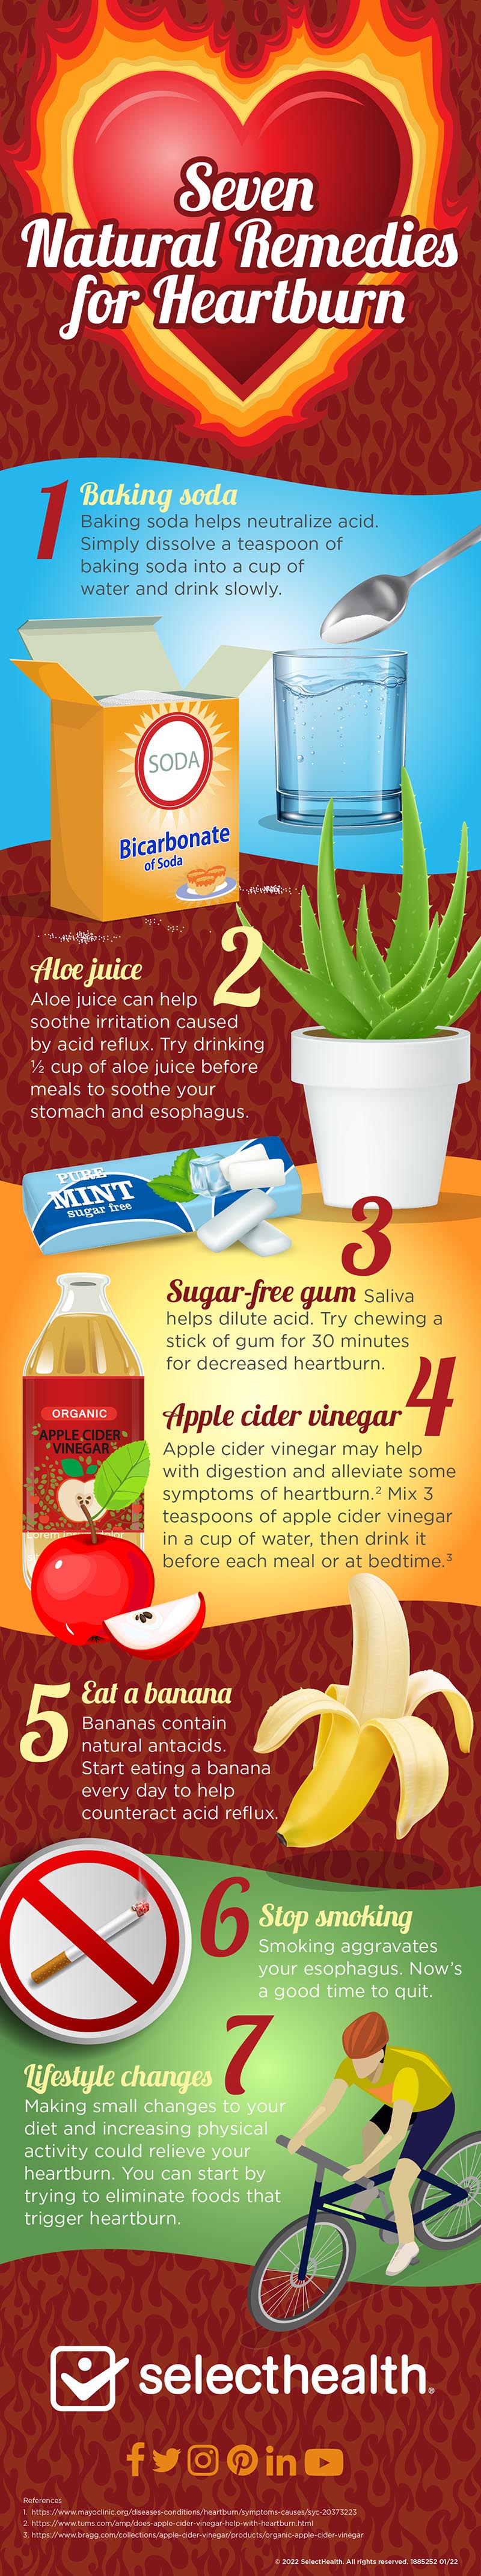 7 Natural Remedies For Heartburn Infographic